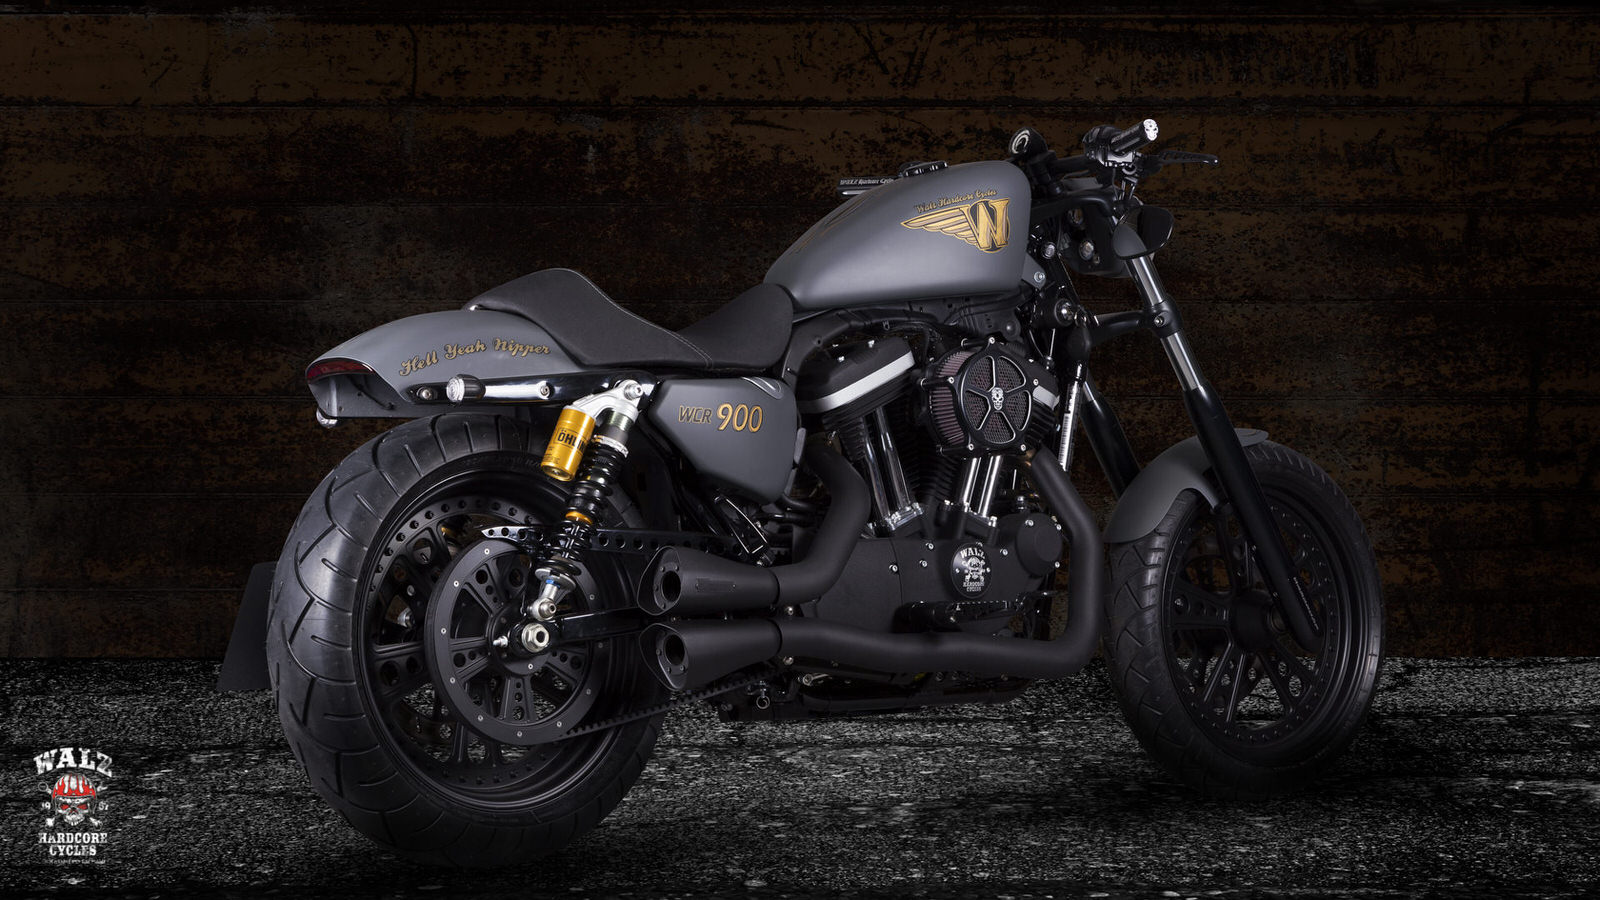 ► Harley-Davidson Sportster “WCR 900” by Walz Hardcore Cycles